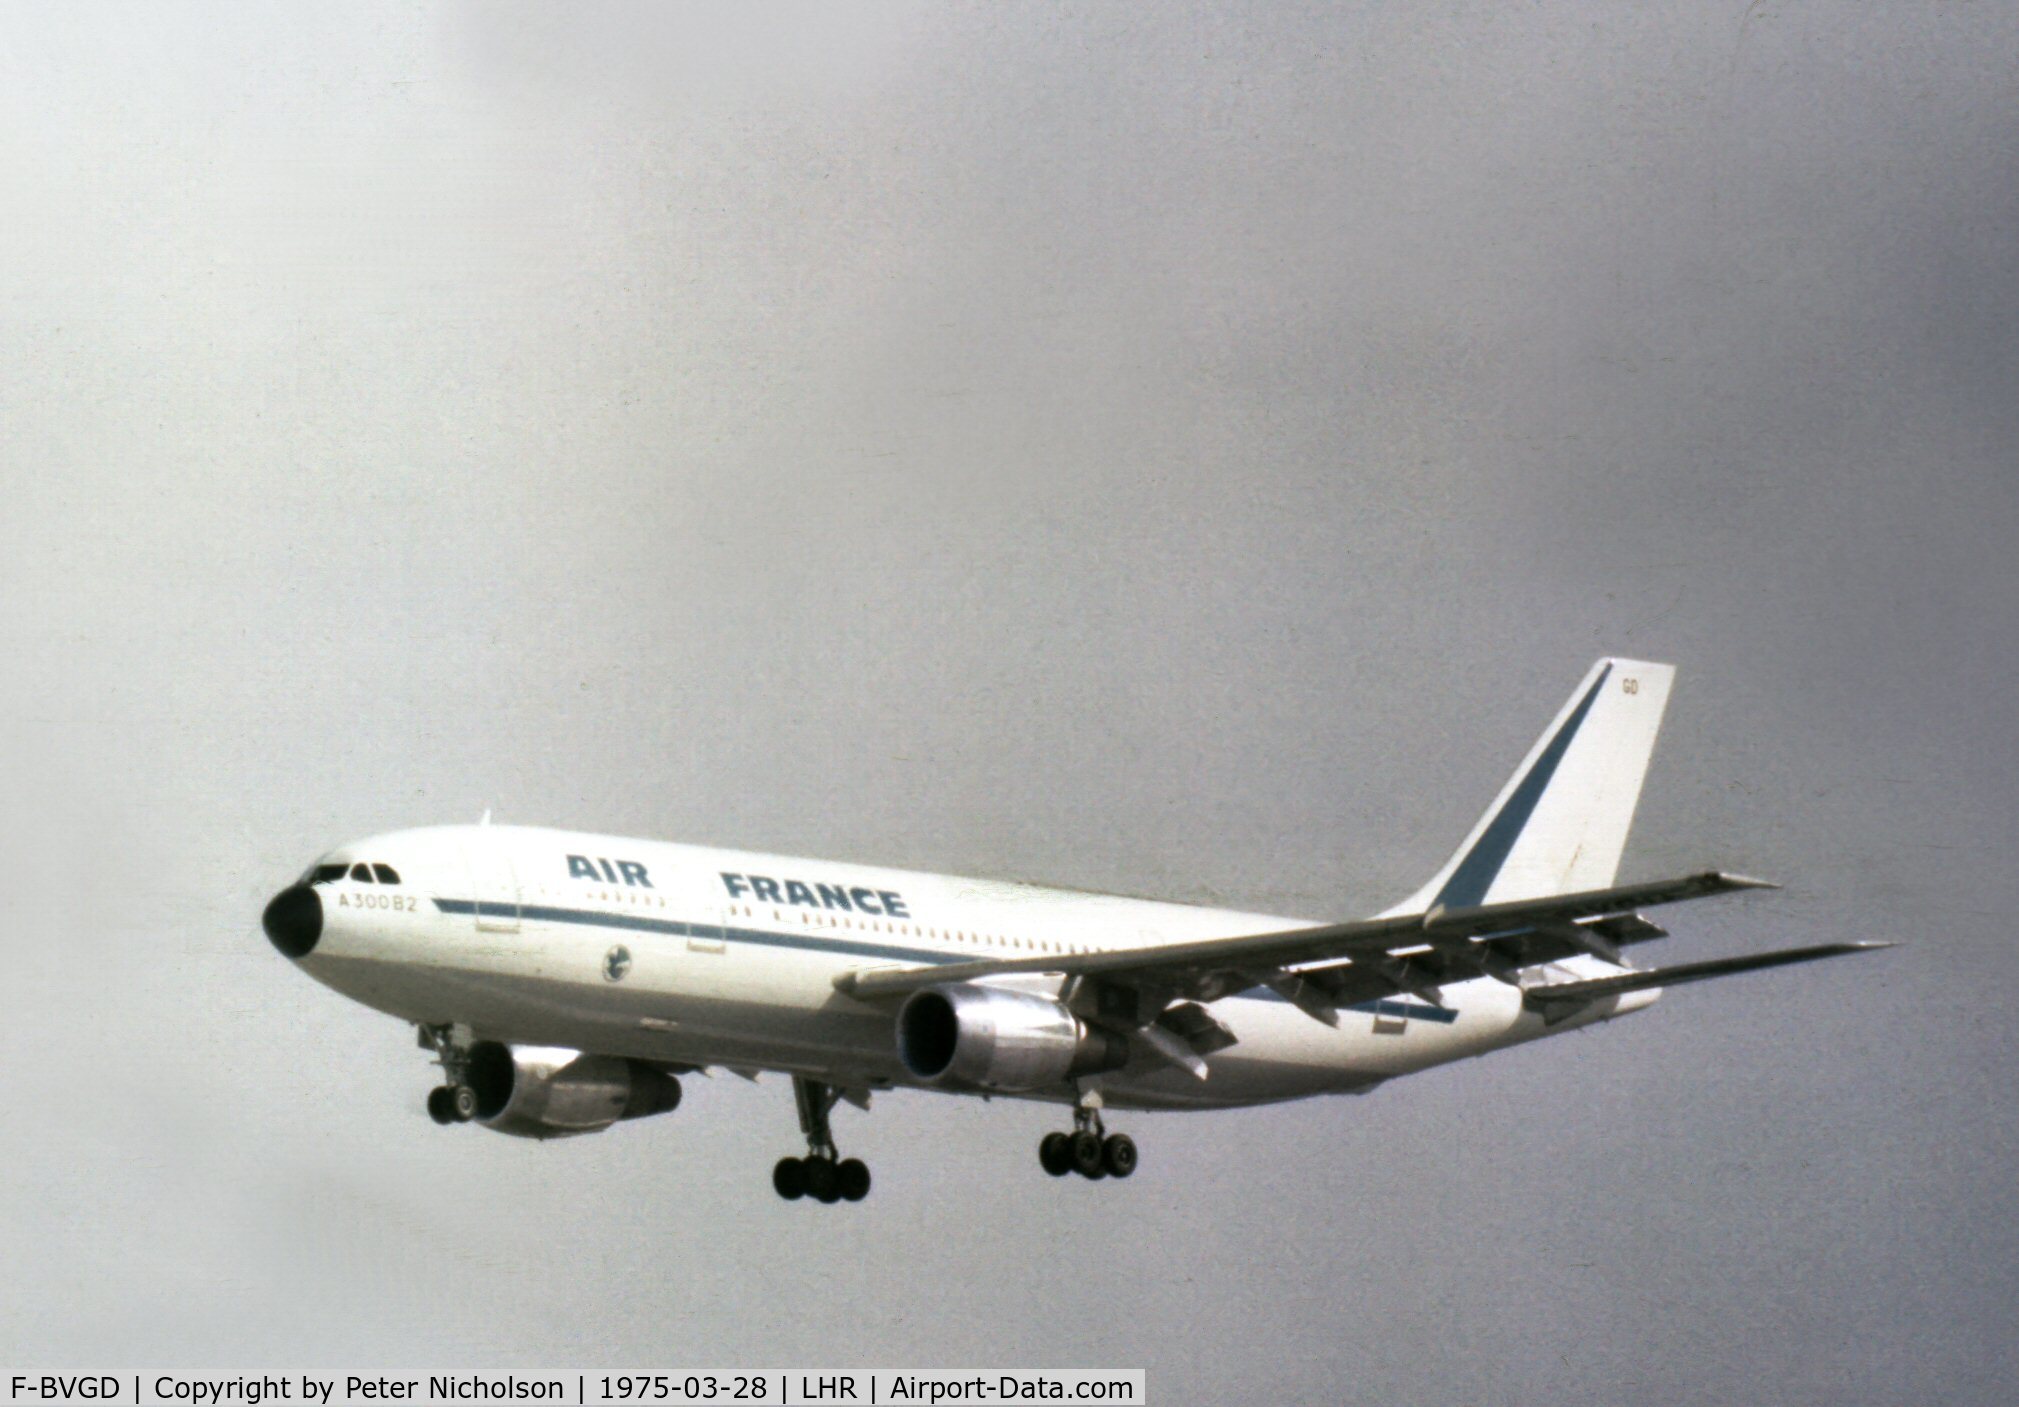 F-BVGD, 1975 Airbus A300B2-1C C/N 10, Airbus A300B2 of Air France on final approach to Heathrow in the Spring of 1975.